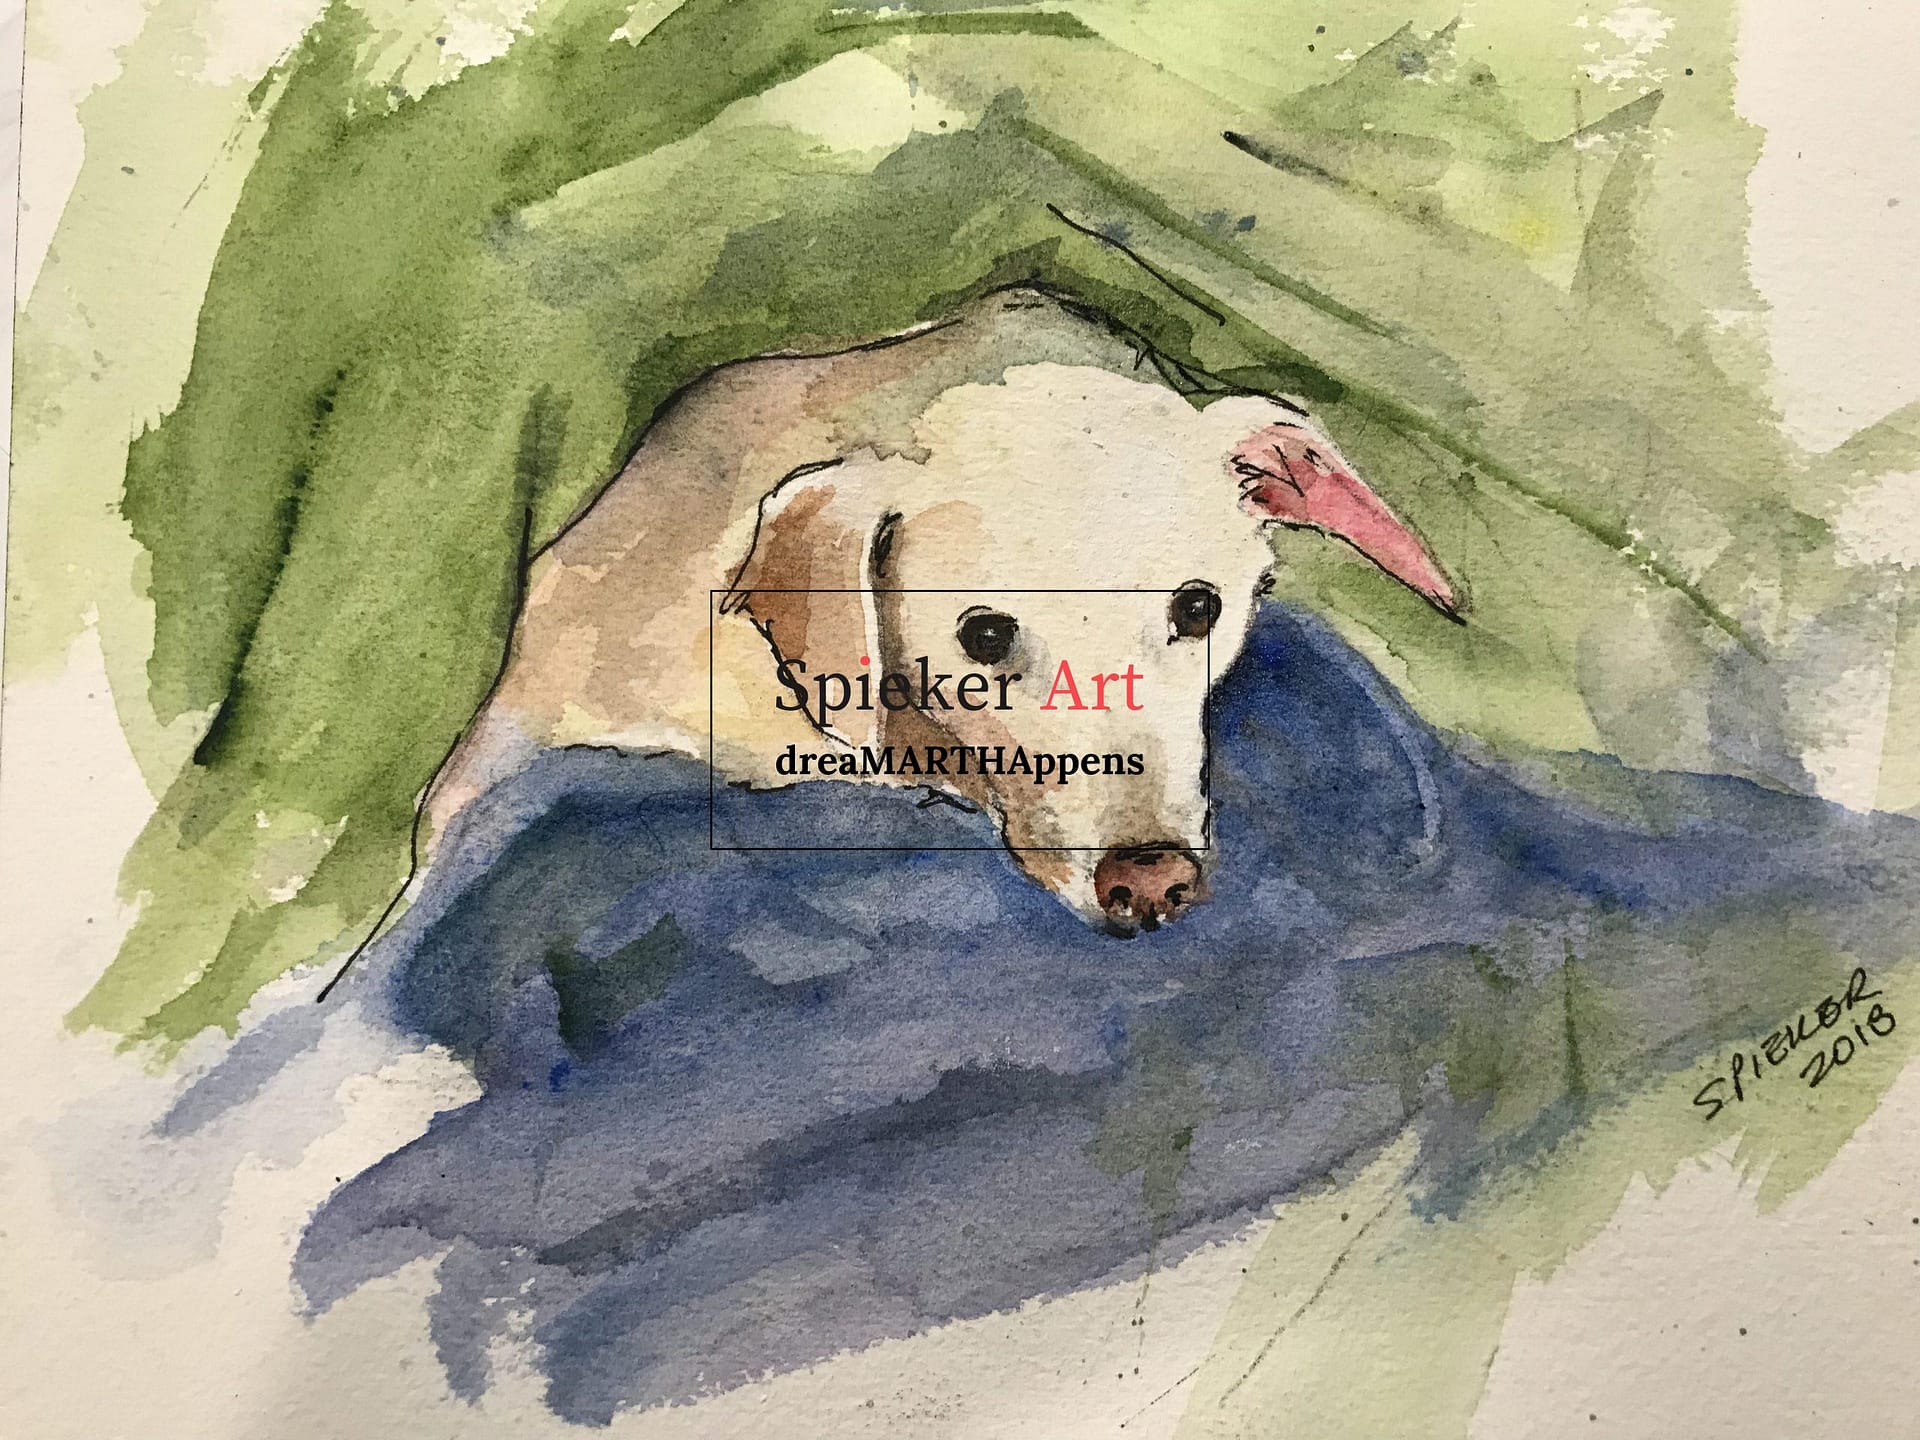 watercolor painting of white dog cuddled in some blankets